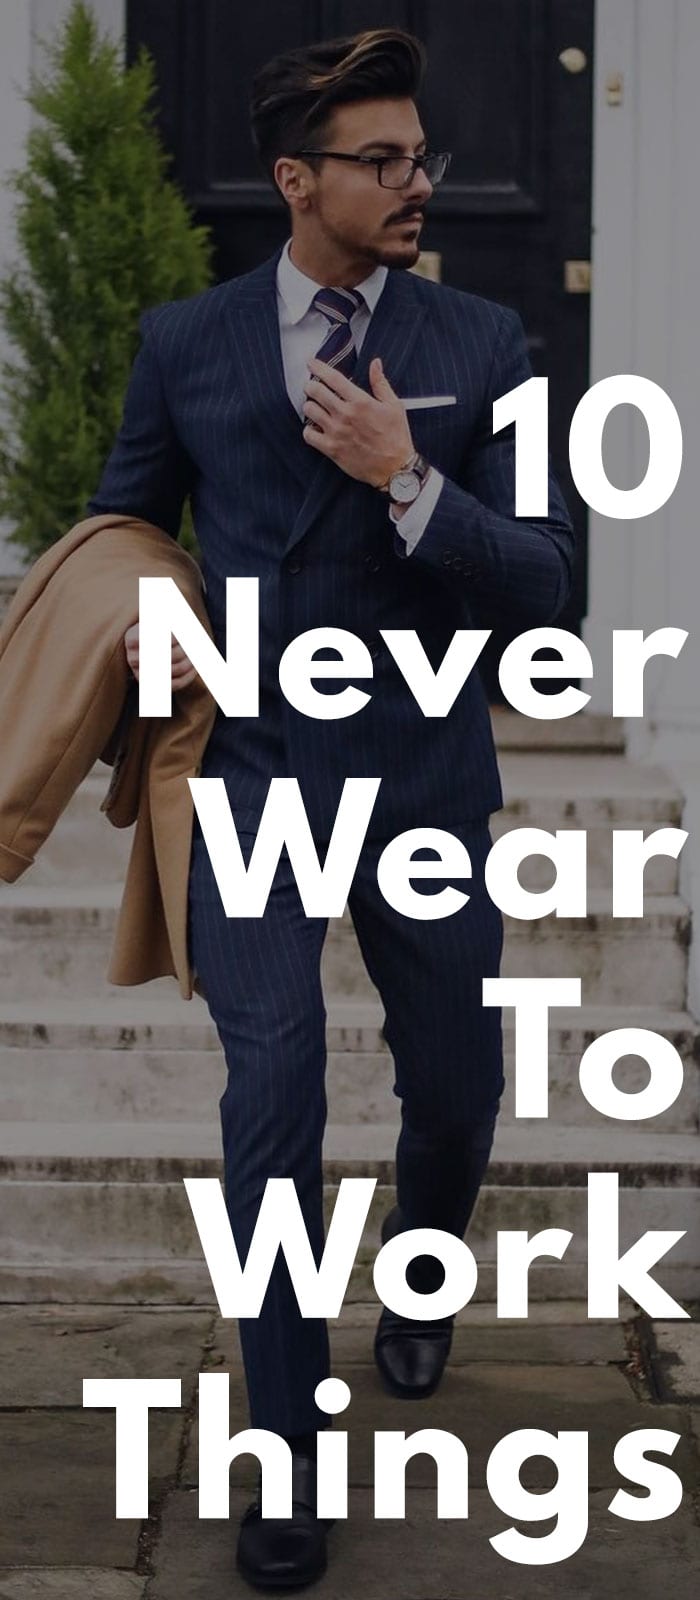 10 never wear to work things